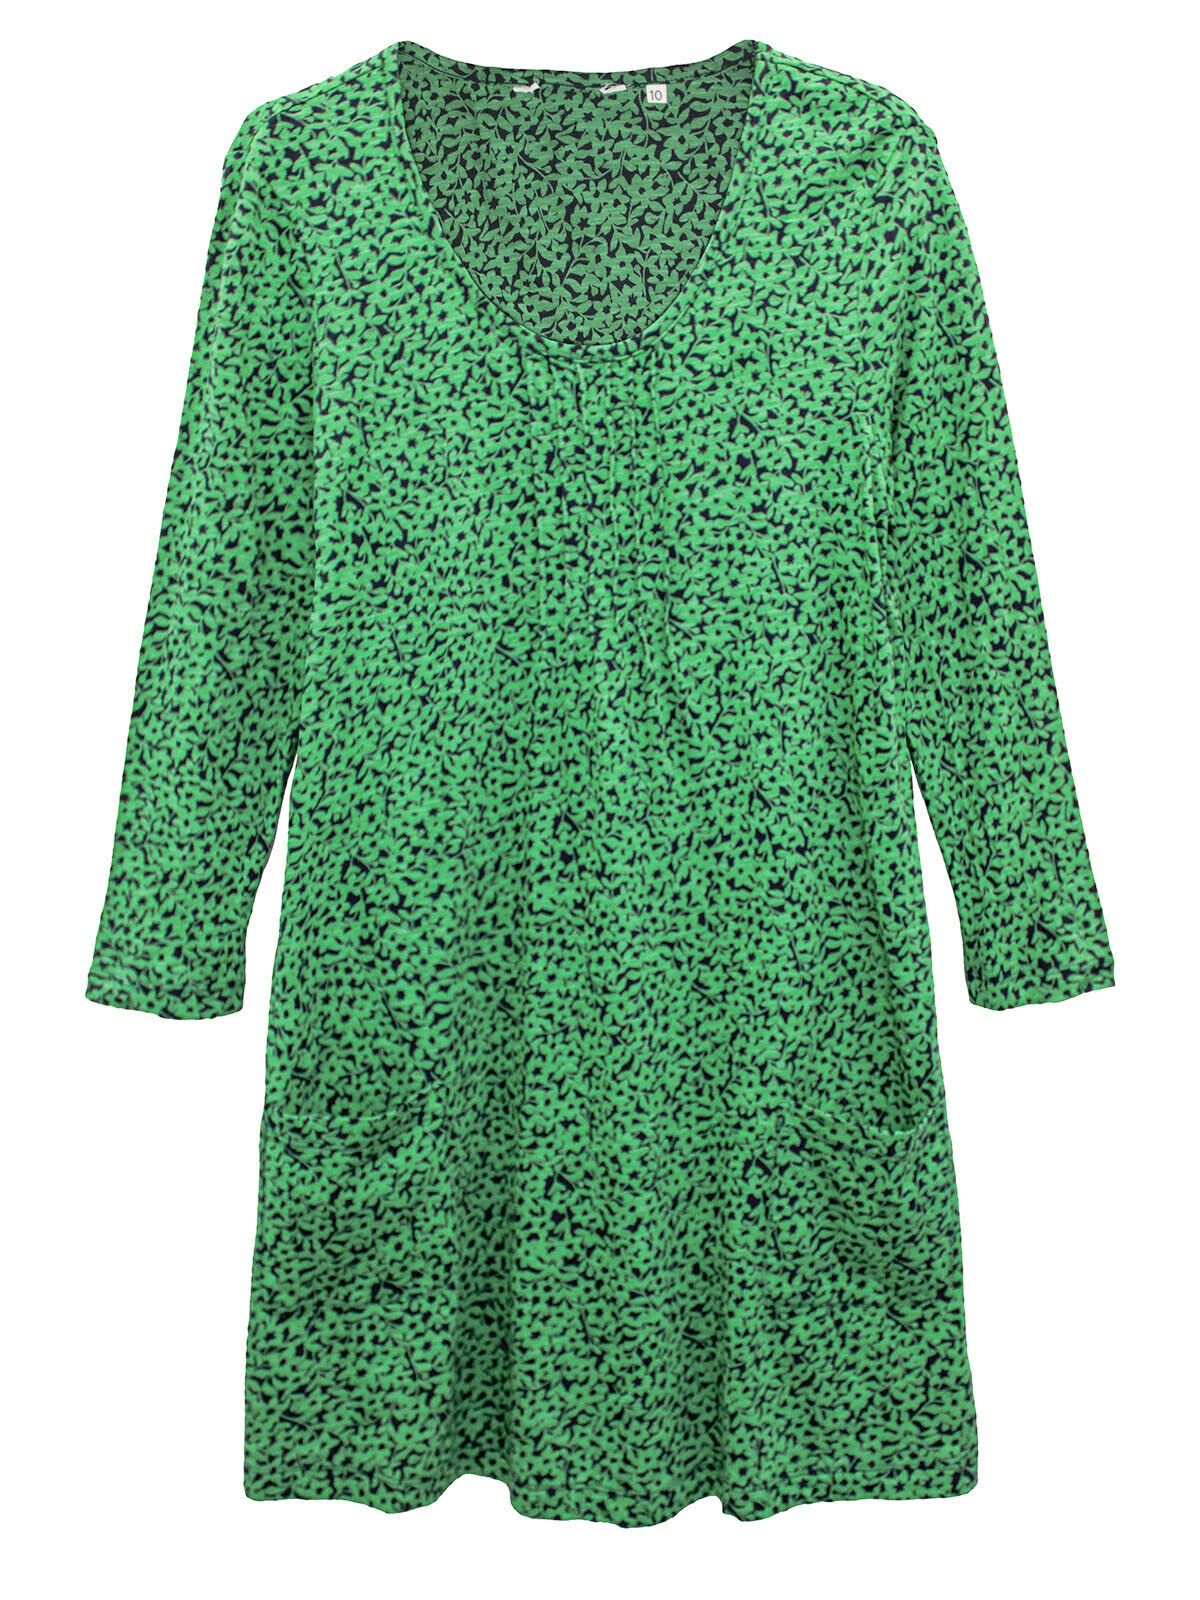 Ex Seasalt Green Floral Busy Lizzy Tunic Top in Sizes 12, 14, 16, 18, 20